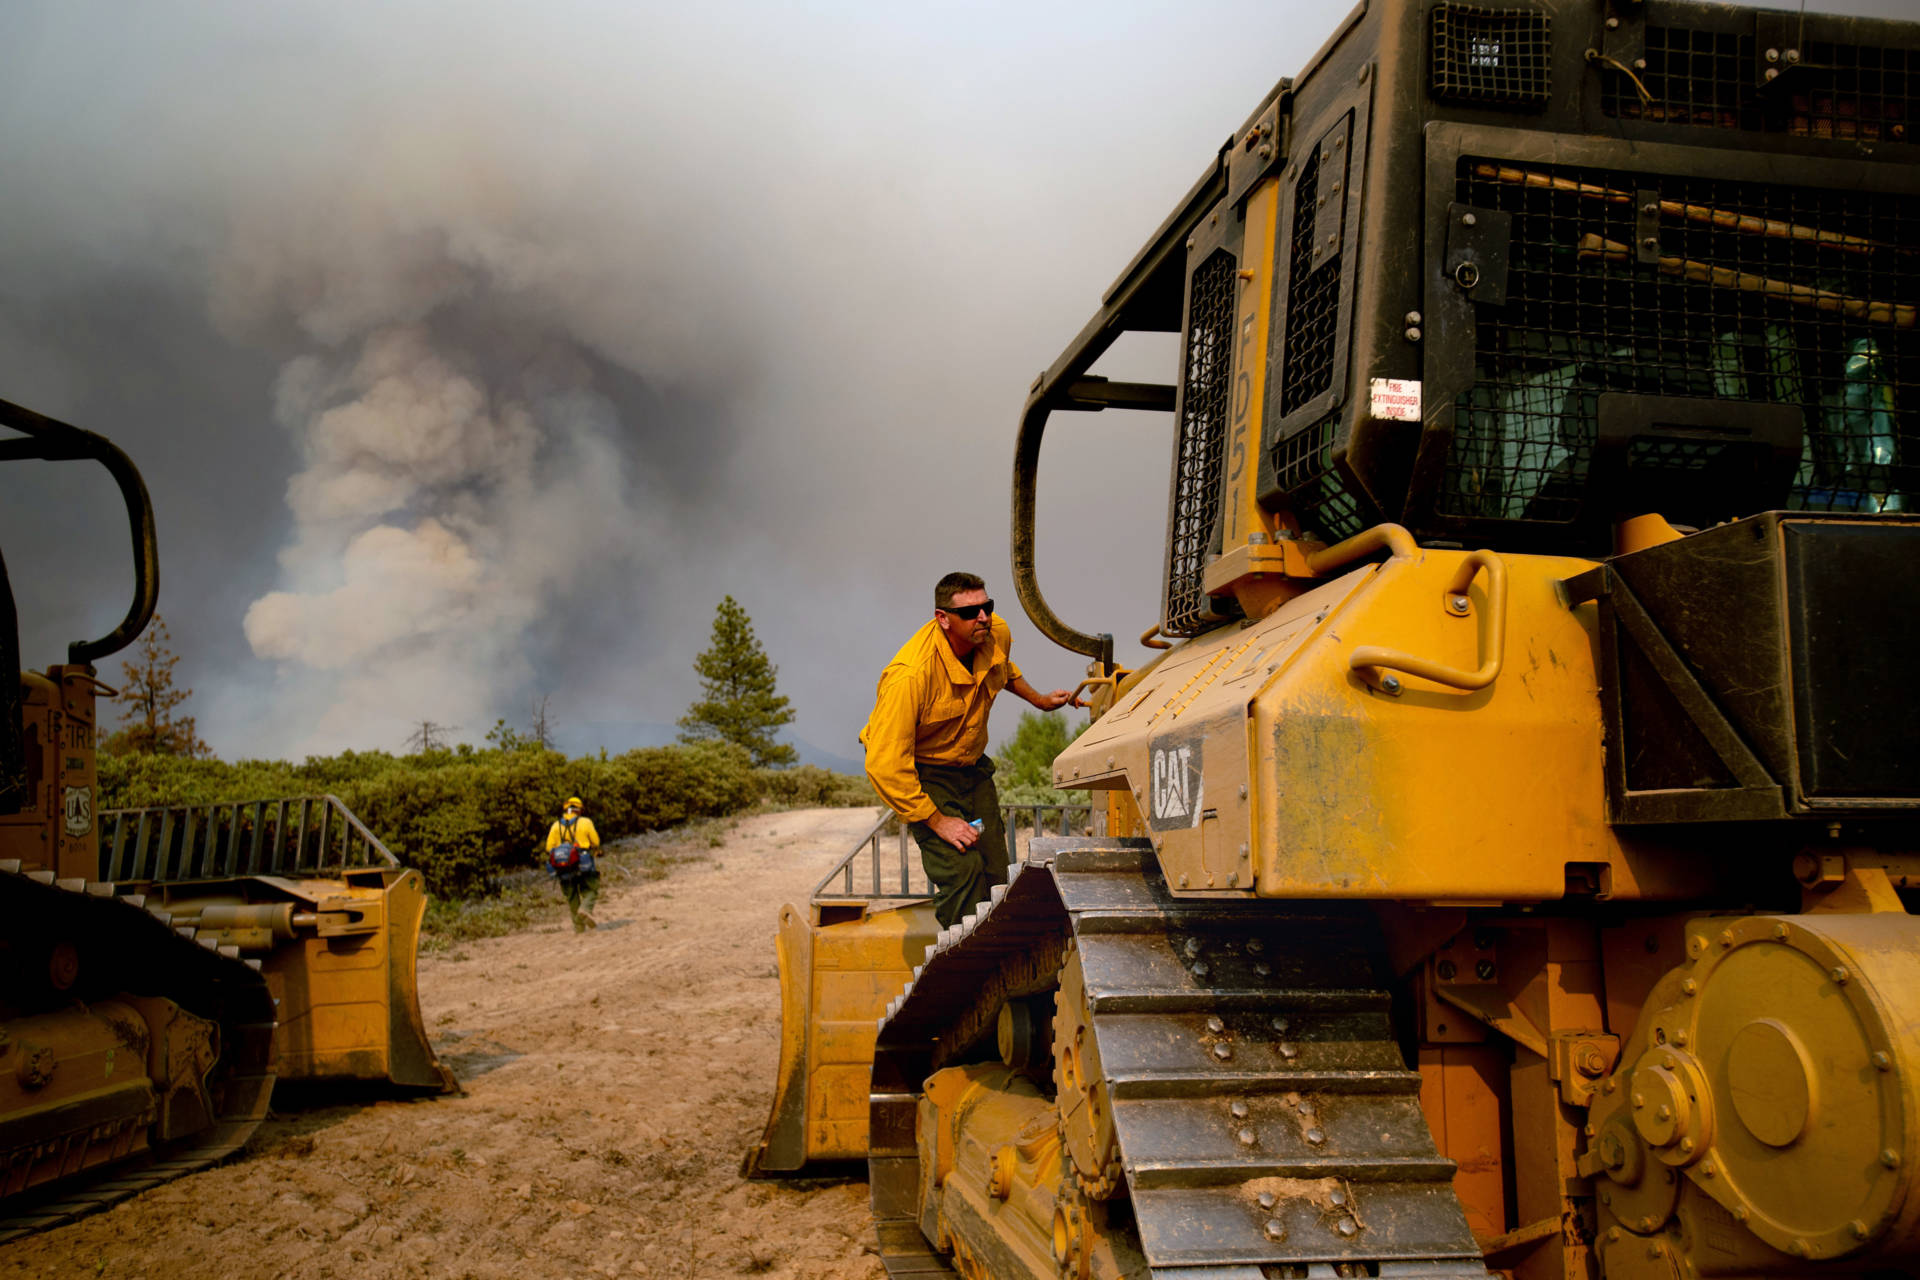 A dozer operator prepares to create a fire break while battling the Ferguson fire in the Stanislaus National Forest, near Yosemite National Park on July 21, 2018. NOAH BERGER/AFP/Getty Images